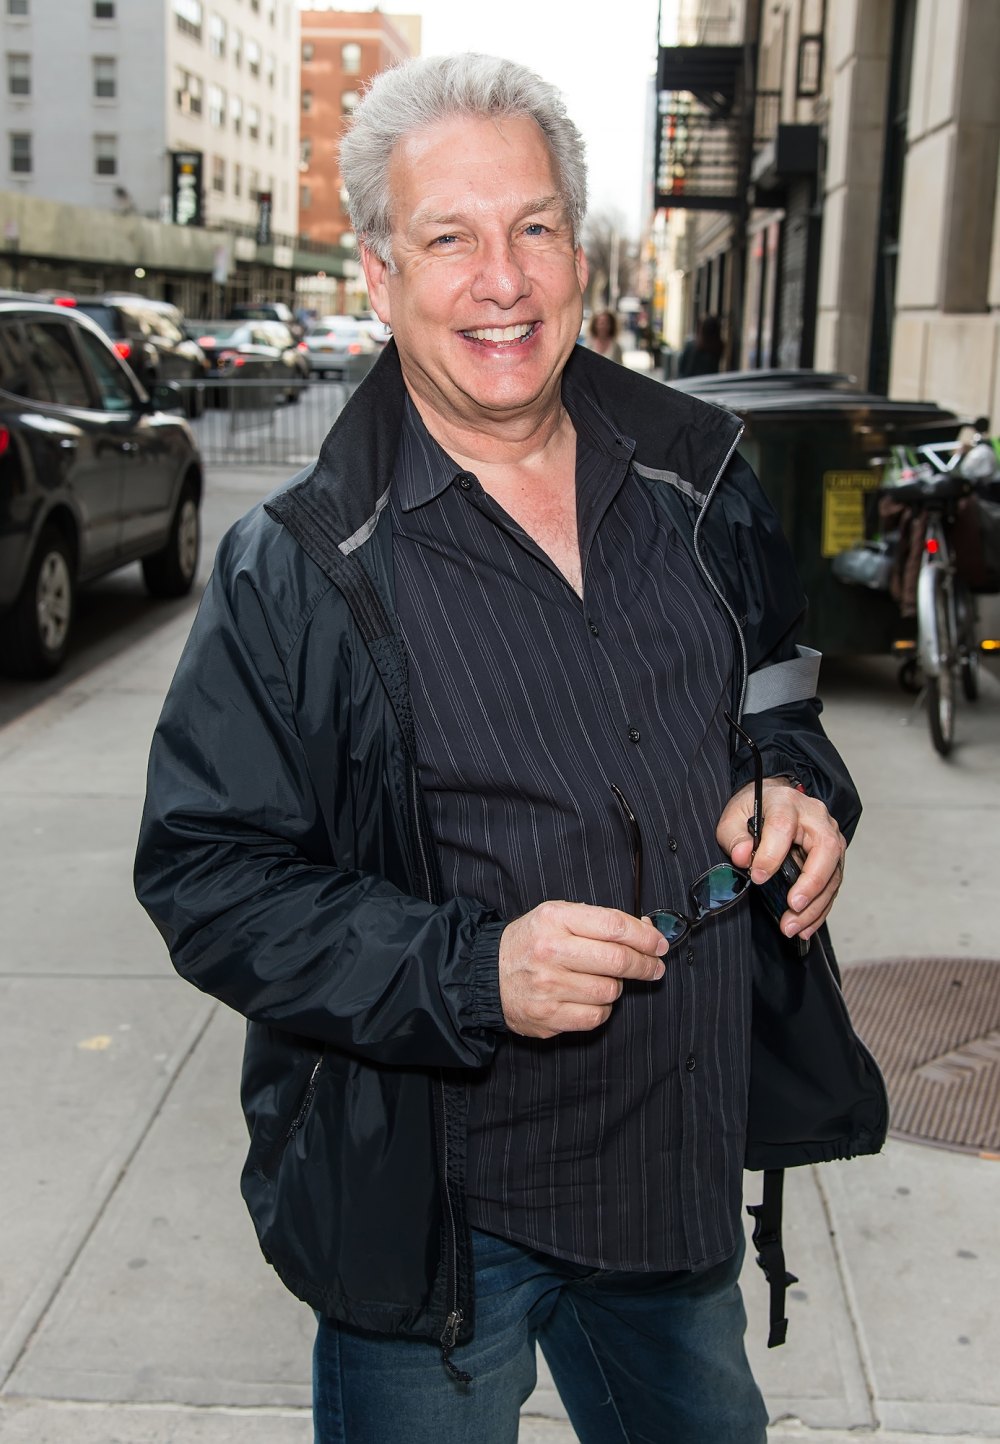 Marc Summers Claims He Was Ambushed During Quiet on Set Interview